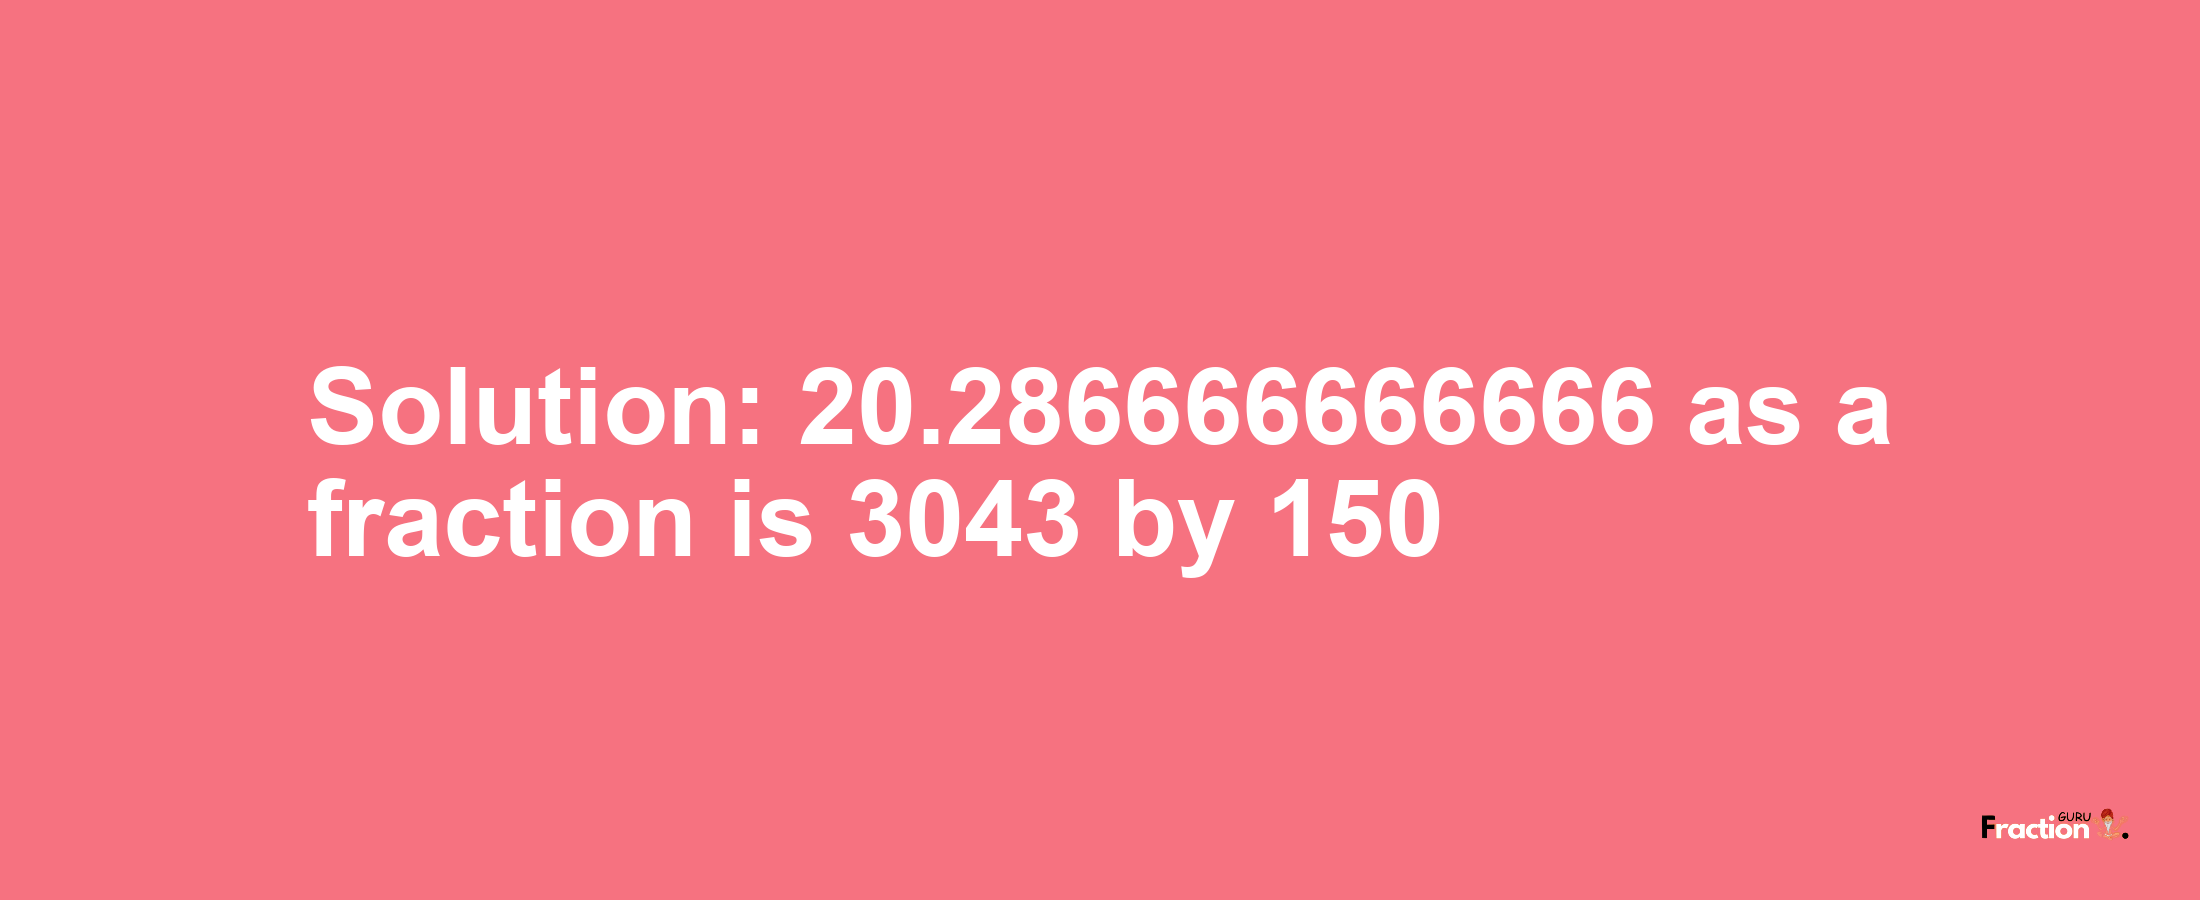 Solution:20.286666666666 as a fraction is 3043/150